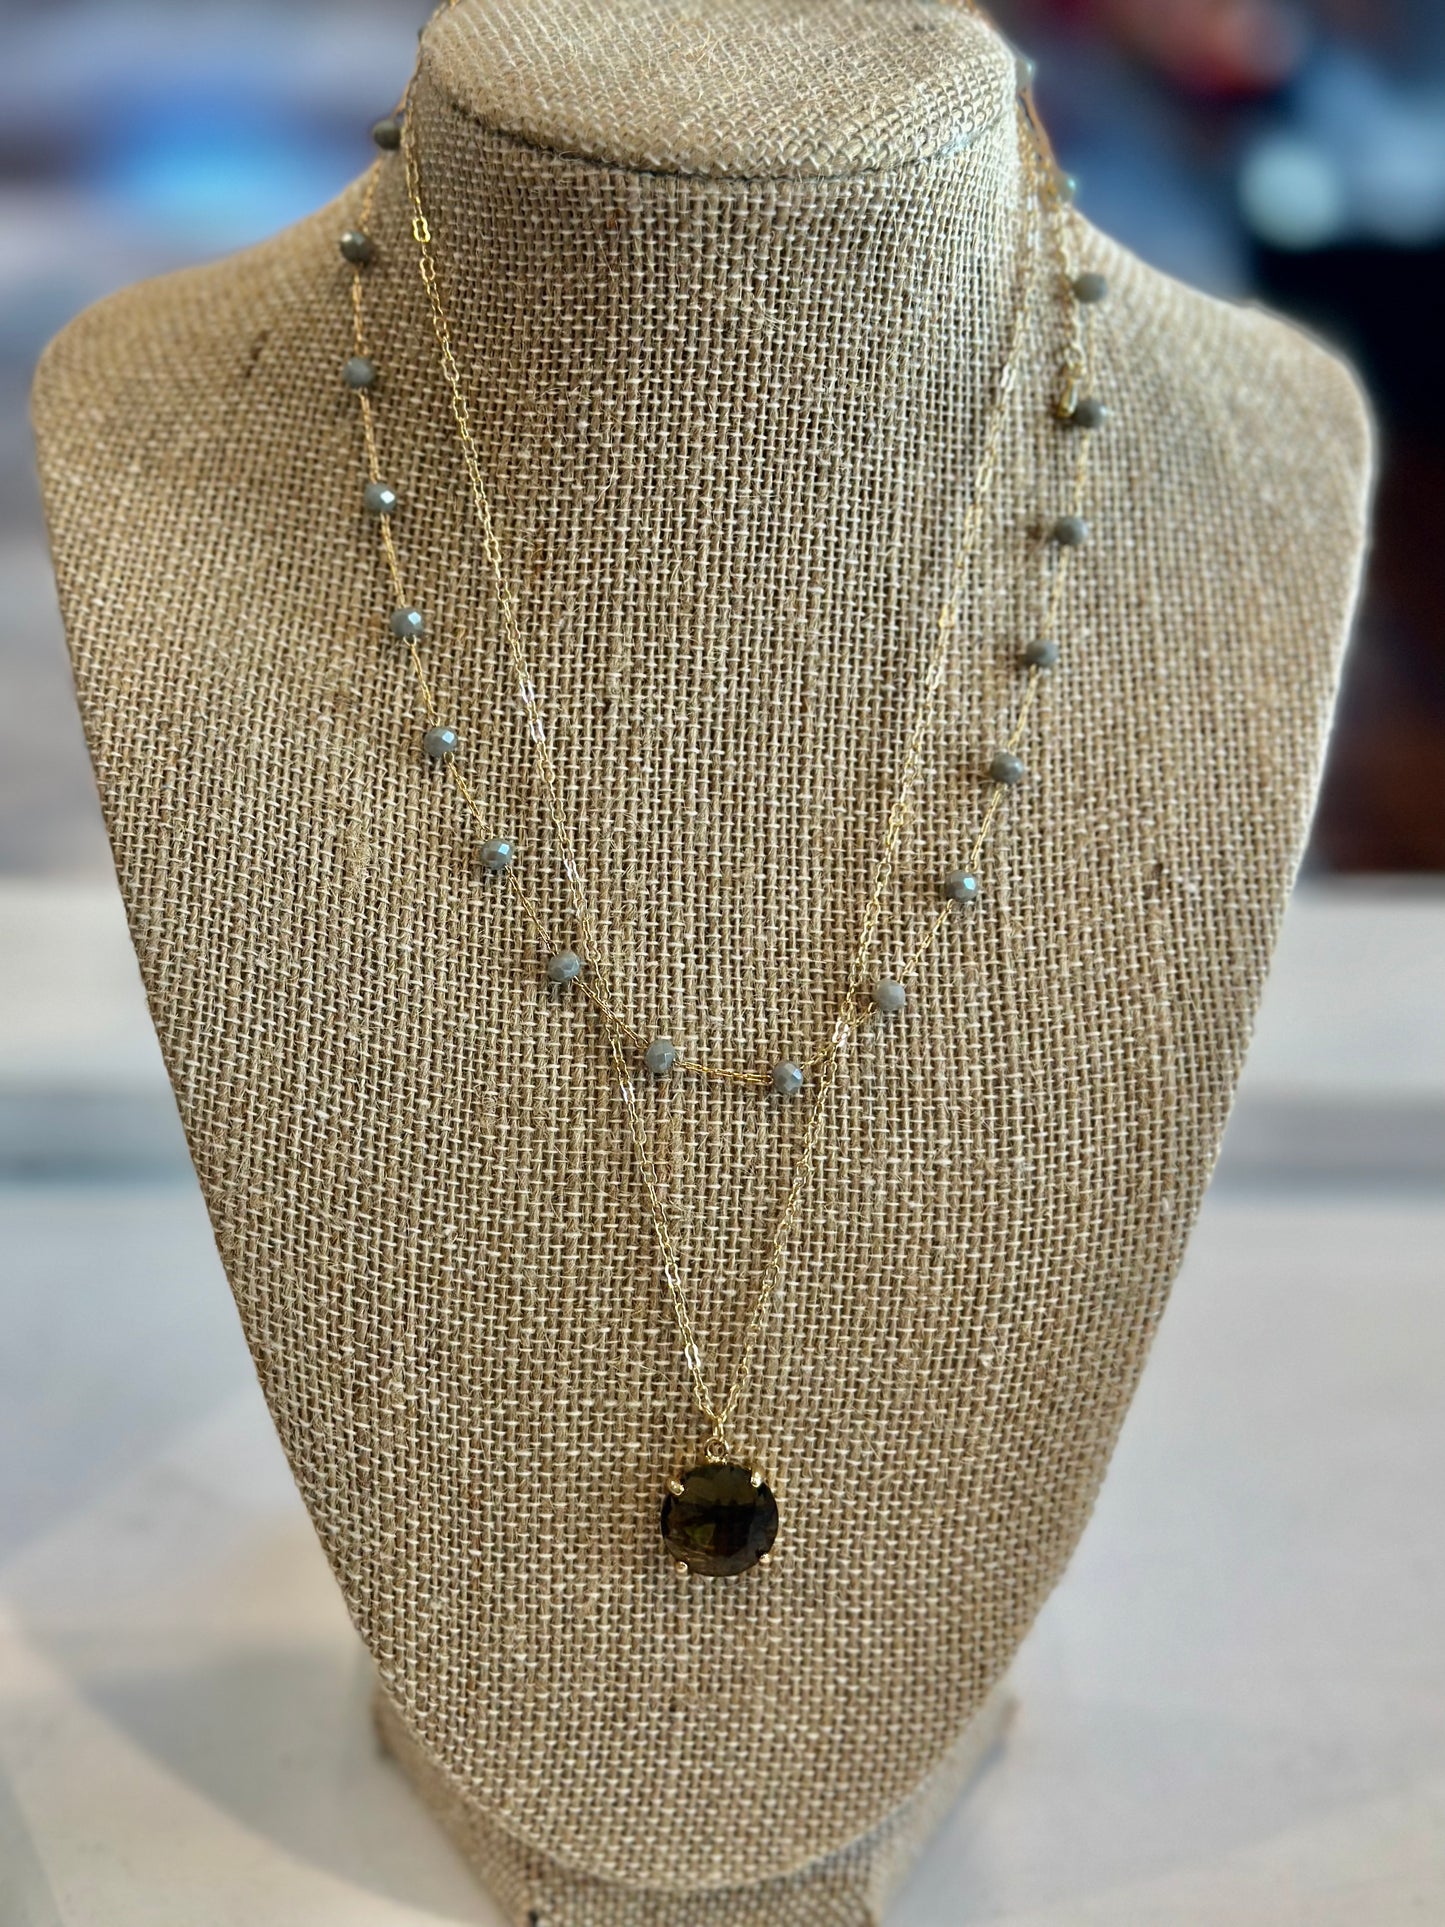 Grey Crystal Layered Necklace